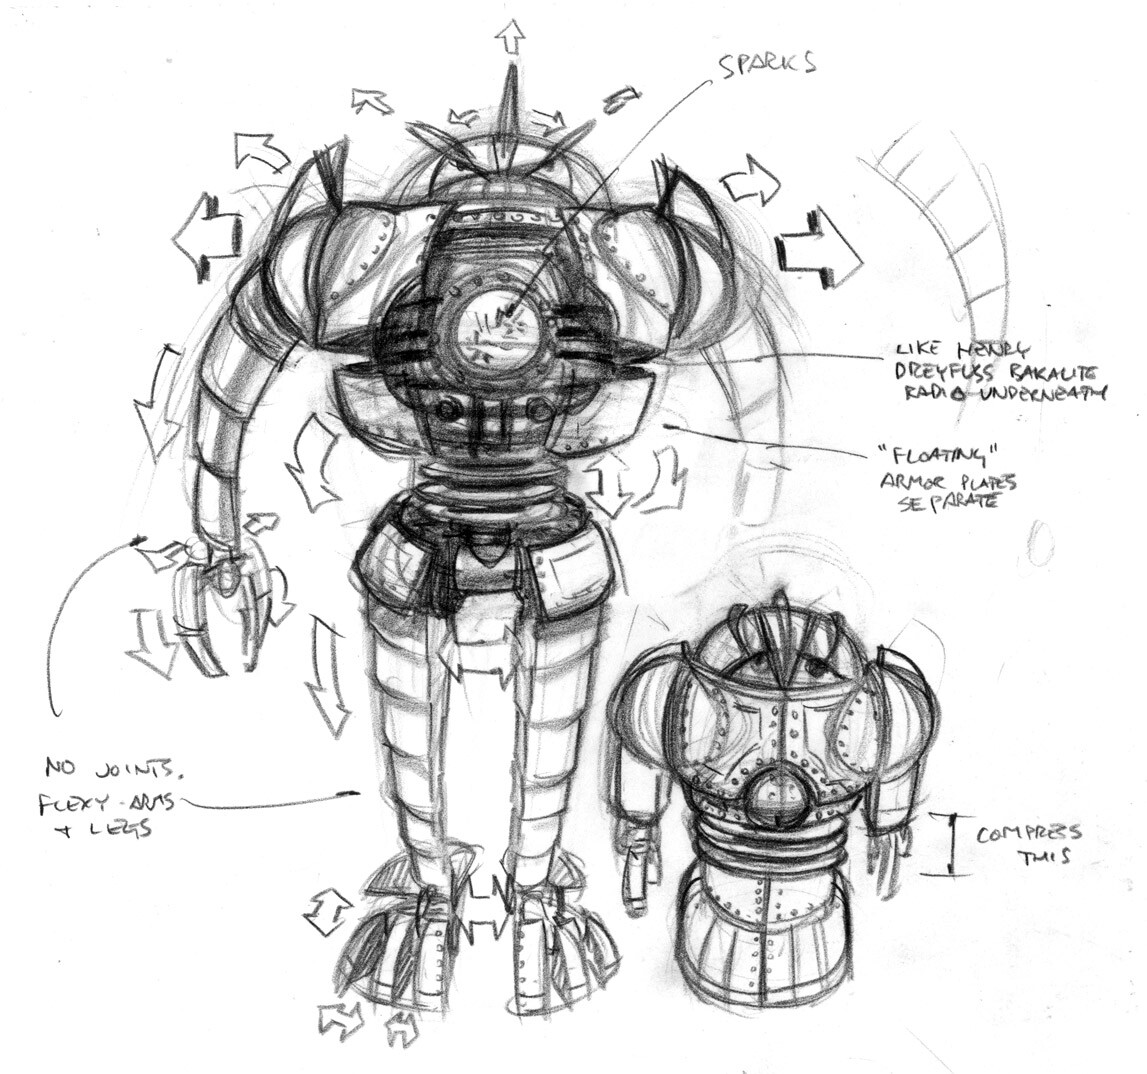 Transformation sketch showing how the earlier concept could expand mechanically from a small wind-up toy to the menacing final robot. 